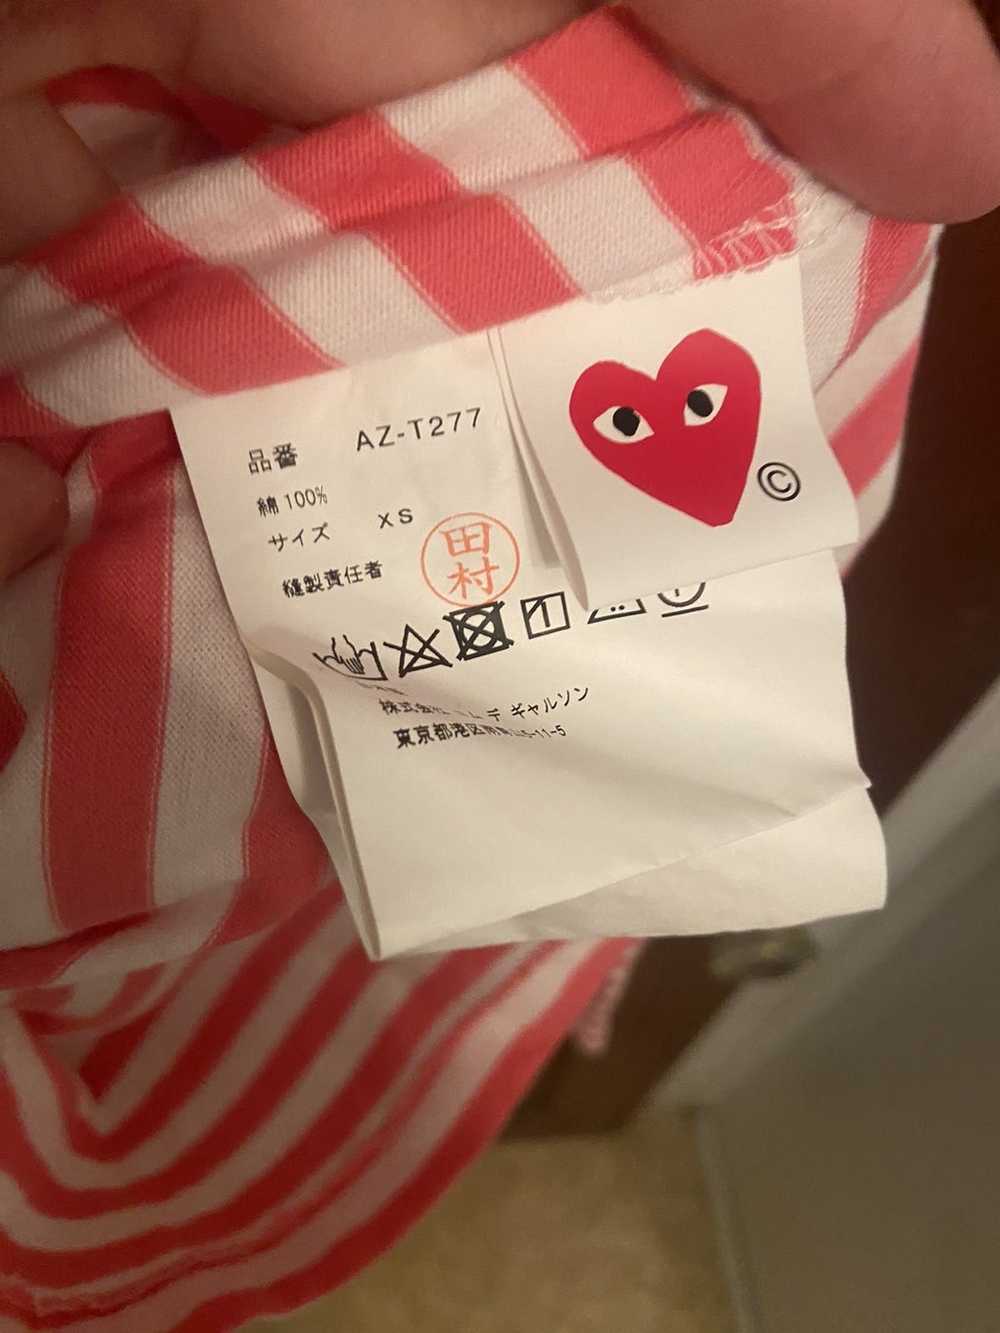 Comme des Garcons Cdg Striped heart logo tee - image 7